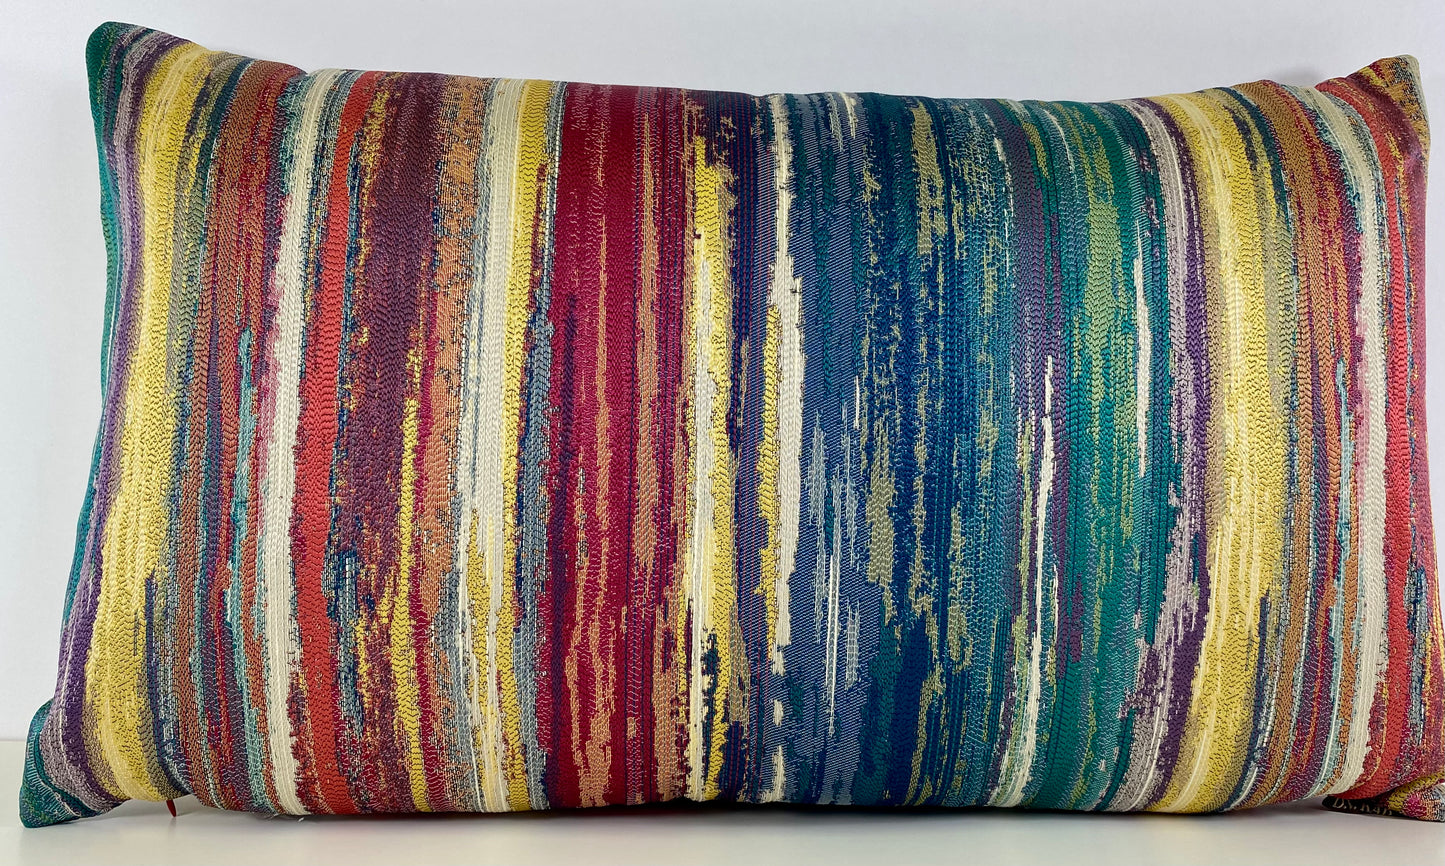 Luxury Lumbar Pillow - 24" x 14" - Roy G Carnival; Embroidered yellow, blue, orange, purple, teal and fuchsia in abstract stripes